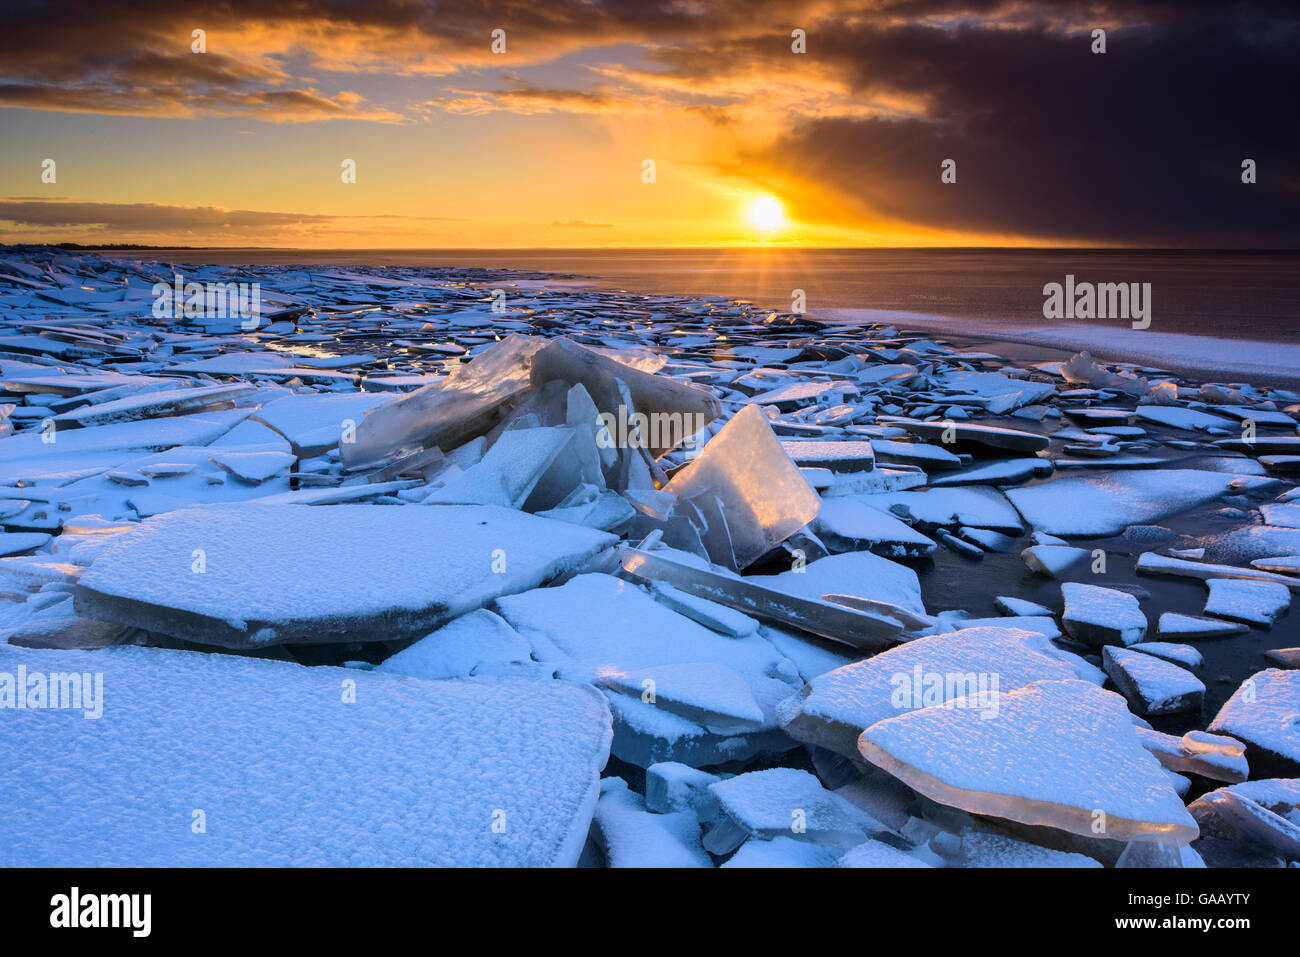 Broken ice covered in snow at sunset, on the shore of Lake Vortsjarv, gathered to shore by extreme winds, Estonia. December 2014. Stock Photo